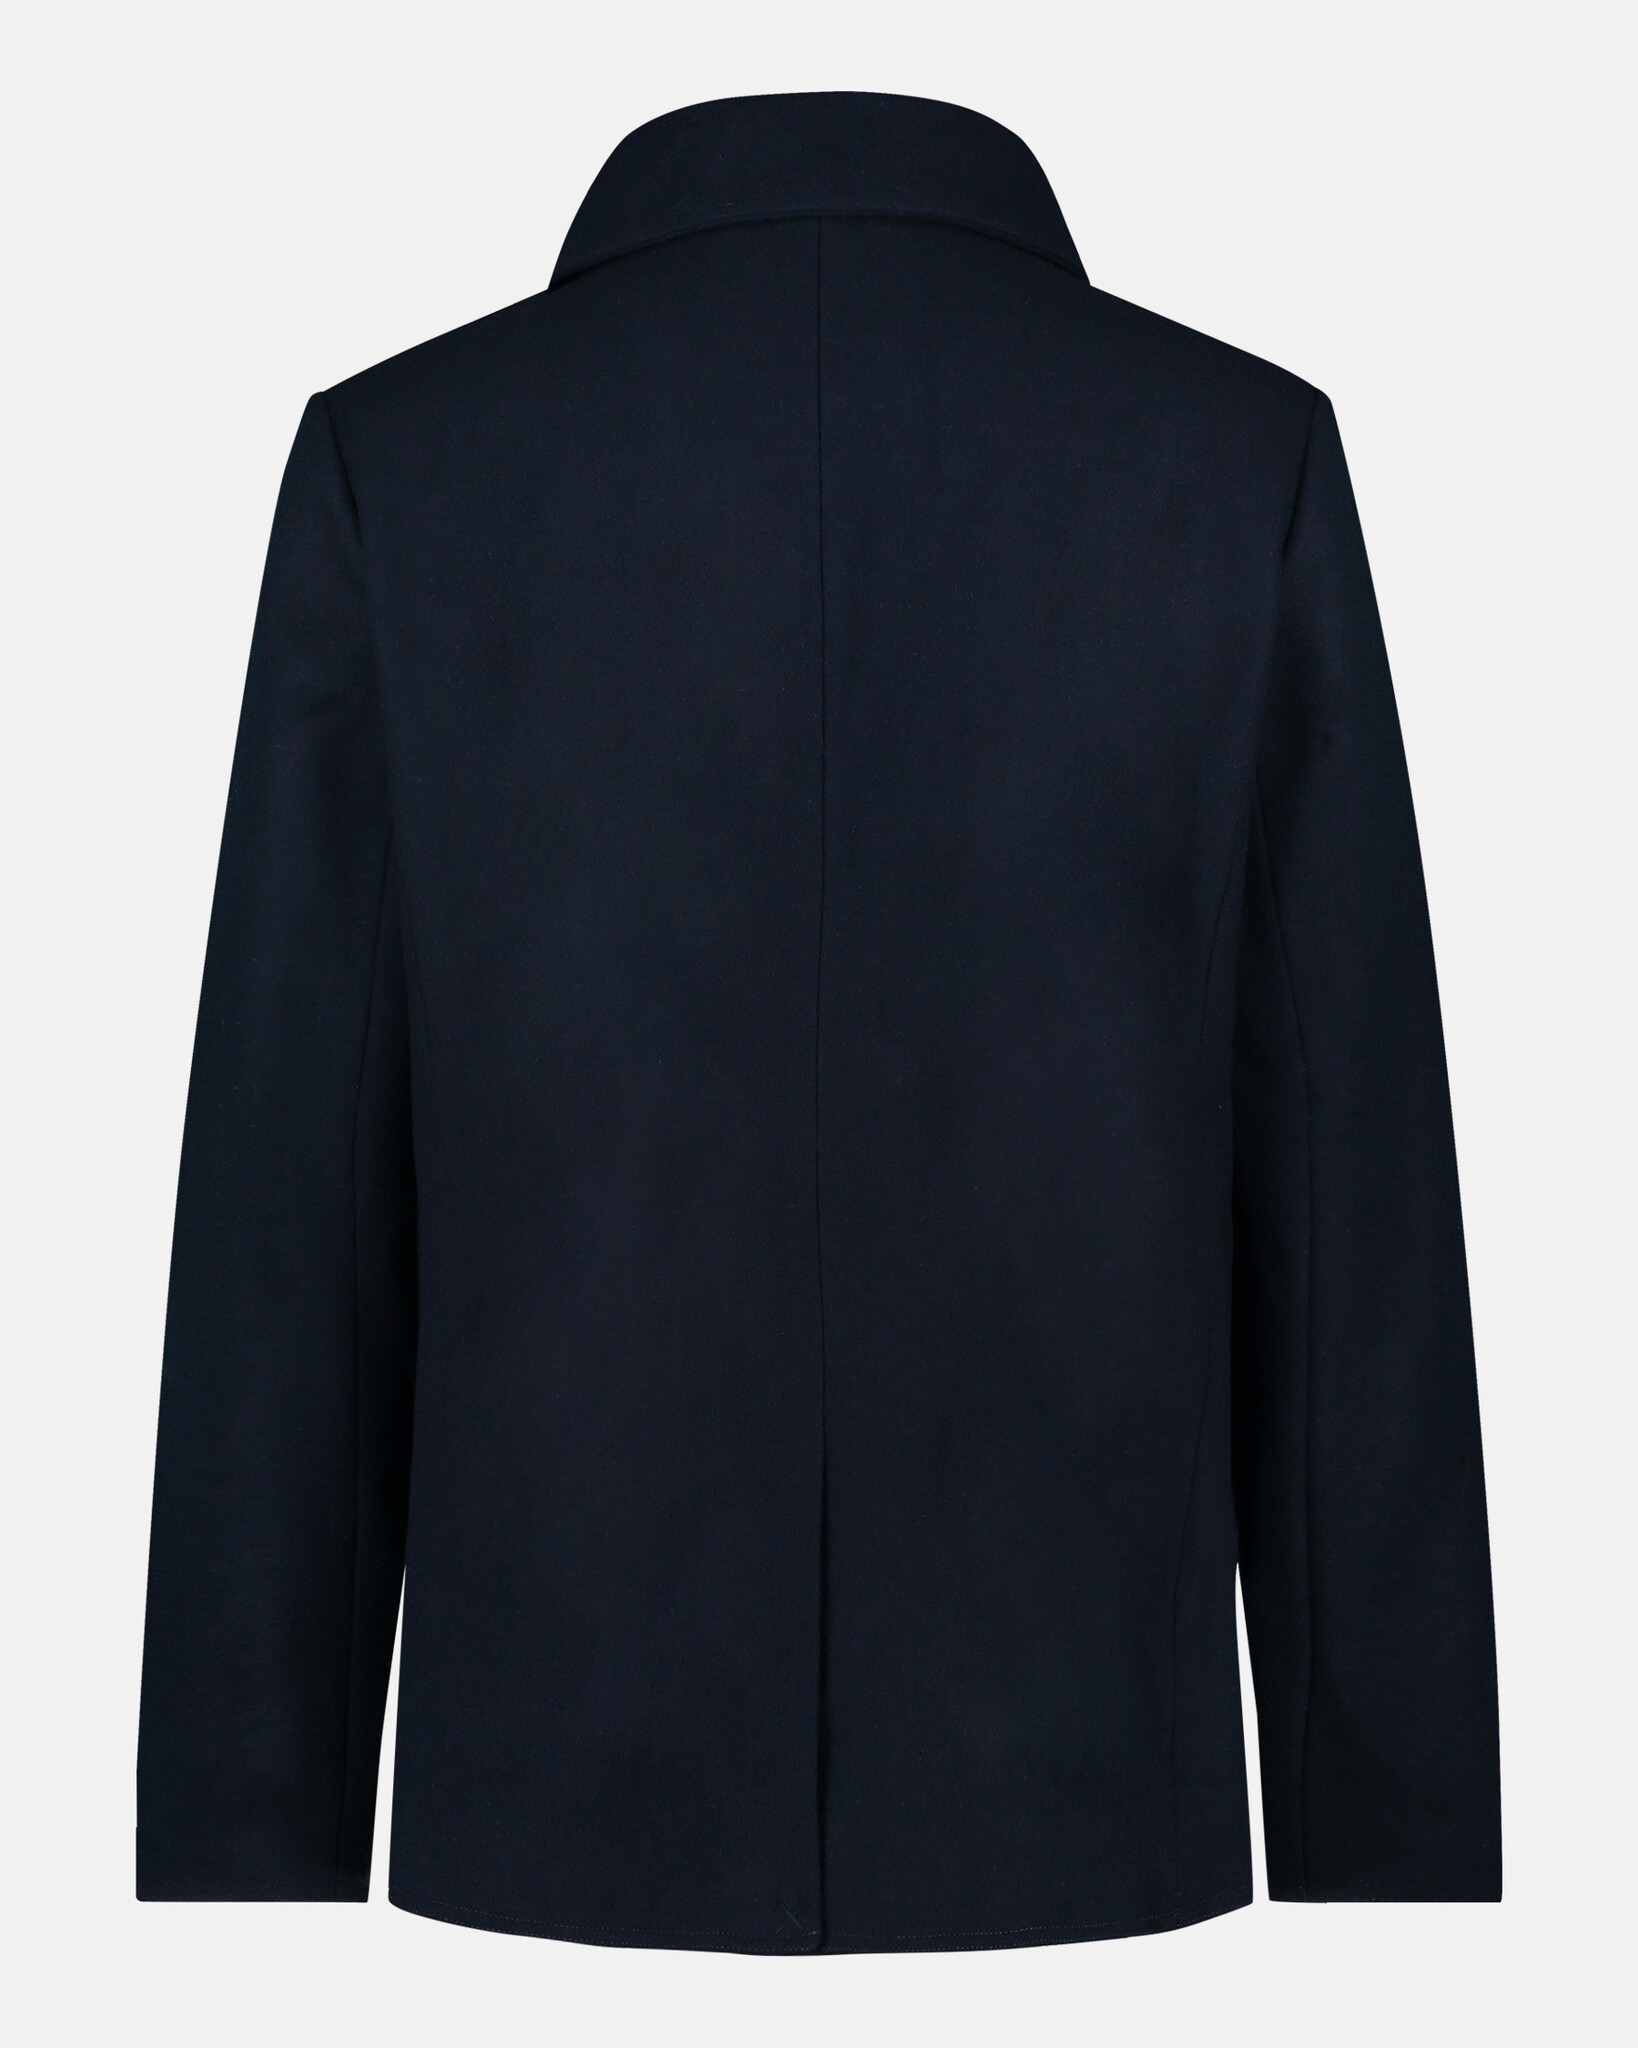 Classic Melton wool double-breasted Peacoat